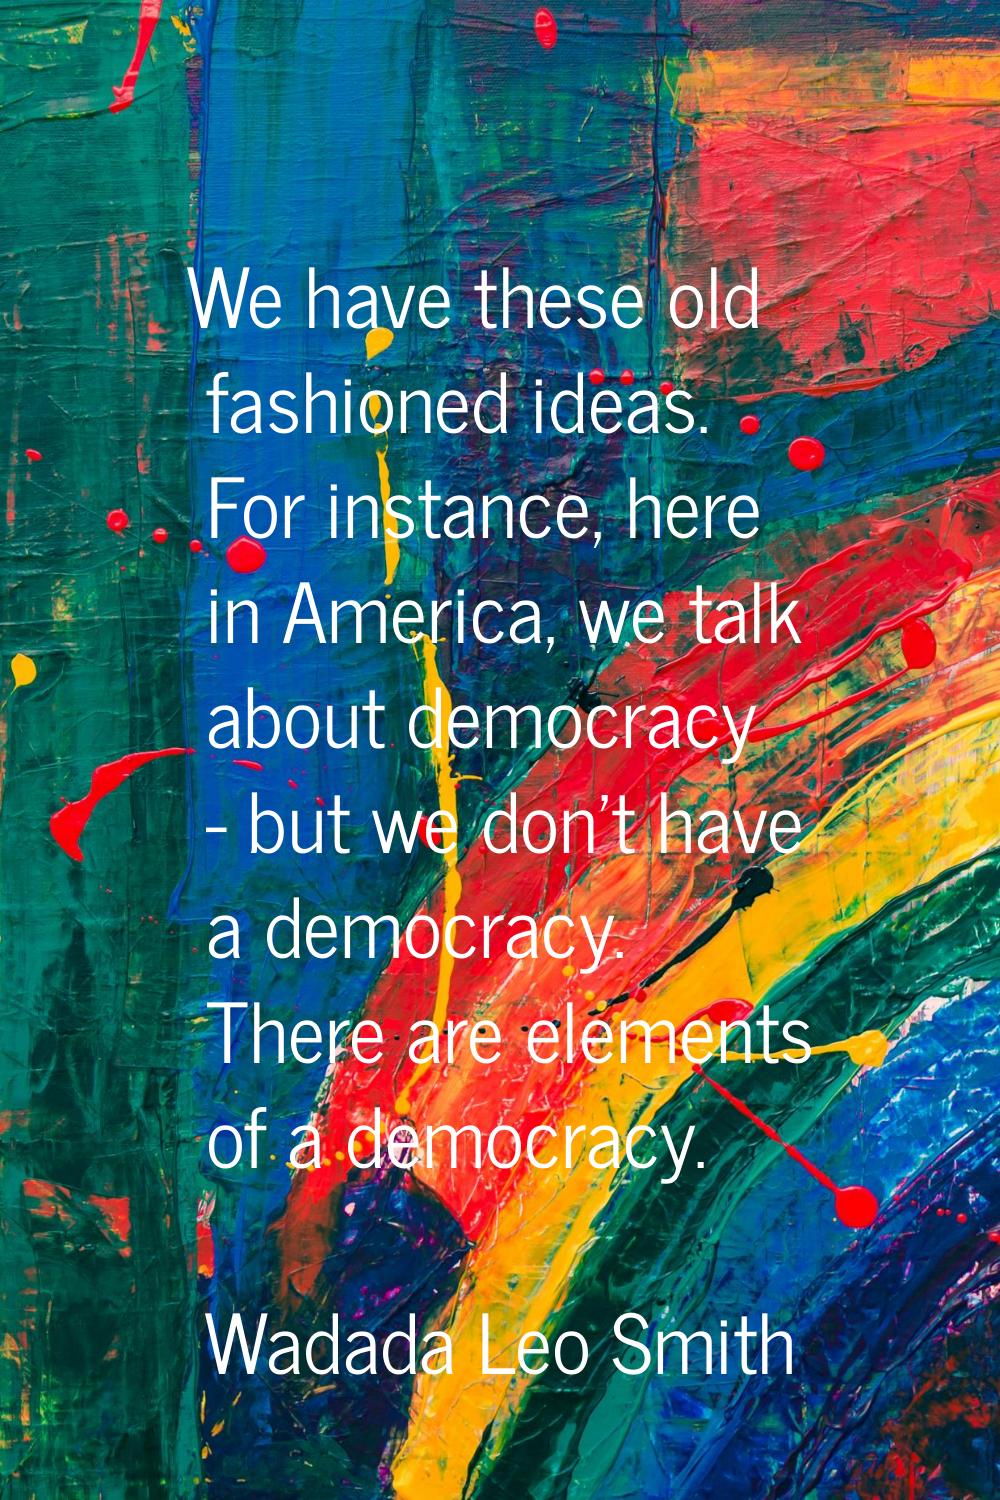 We have these old fashioned ideas. For instance, here in America, we talk about democracy - but we 